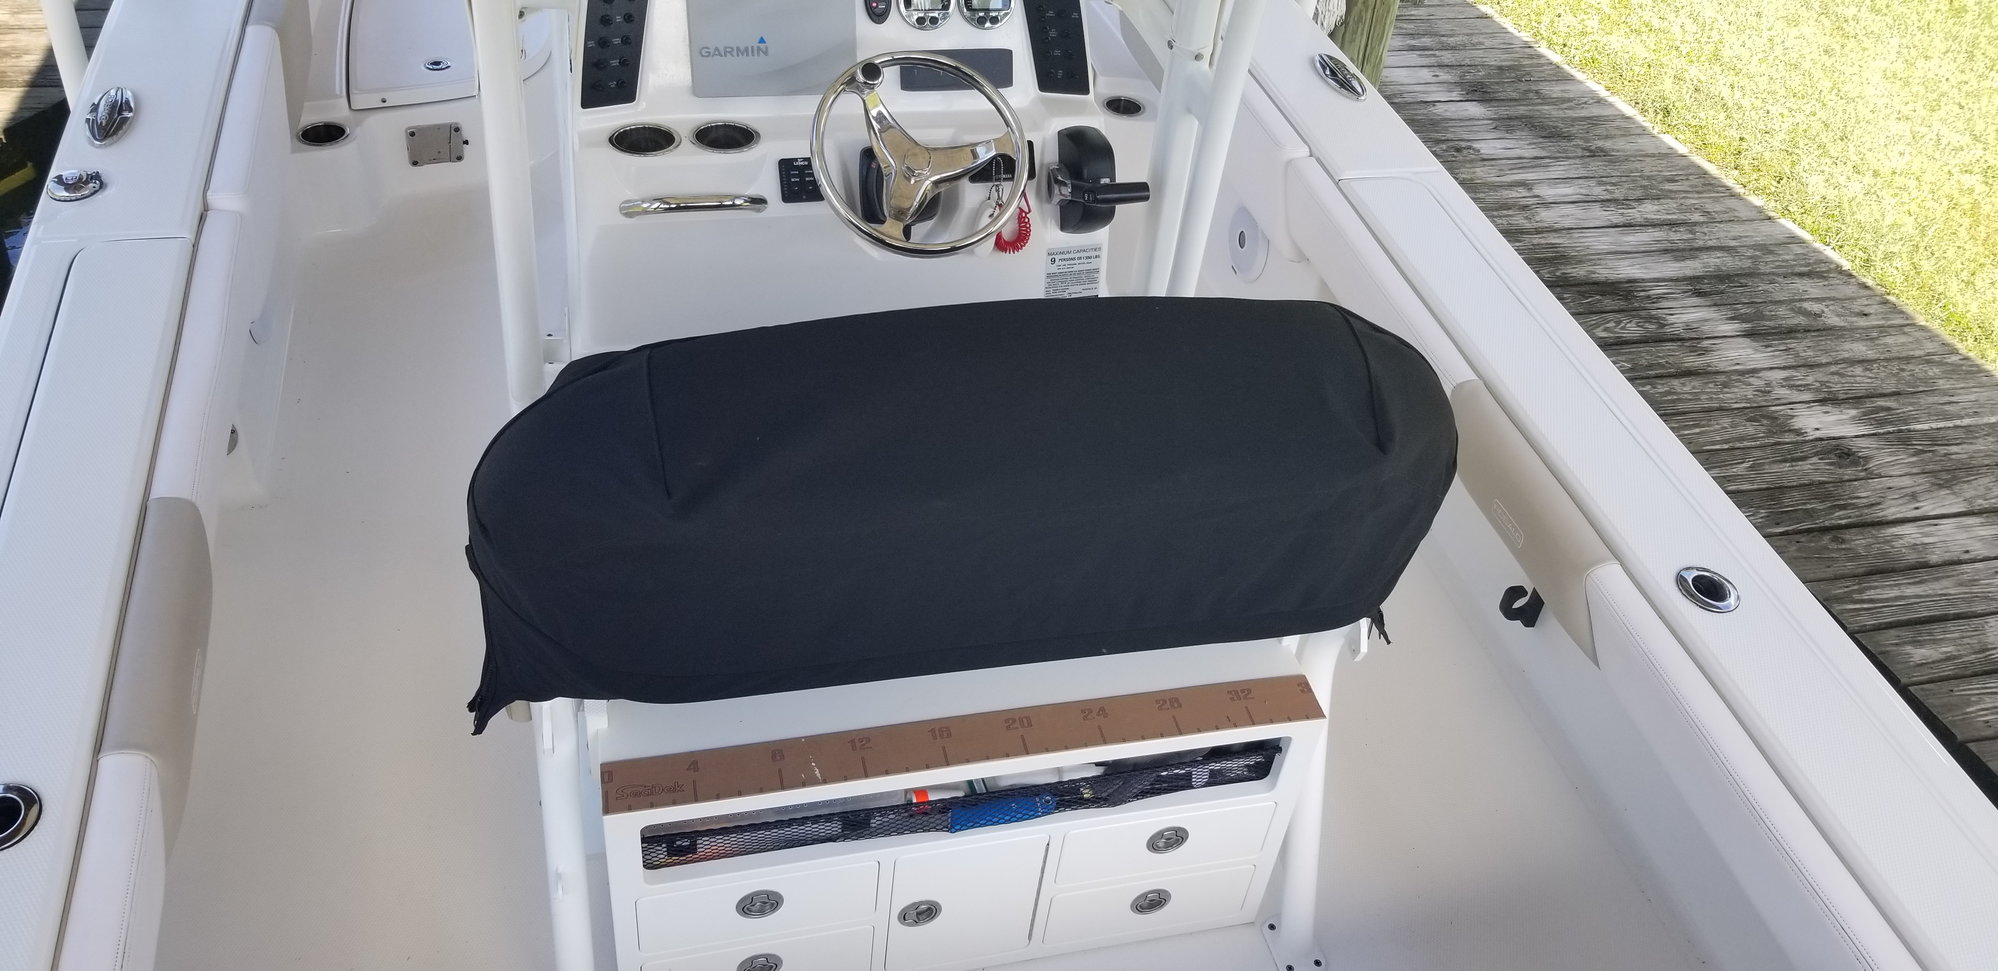 Robalo Cayman Thread - Page 262 - The Hull Truth - Boating and Fishing Forum